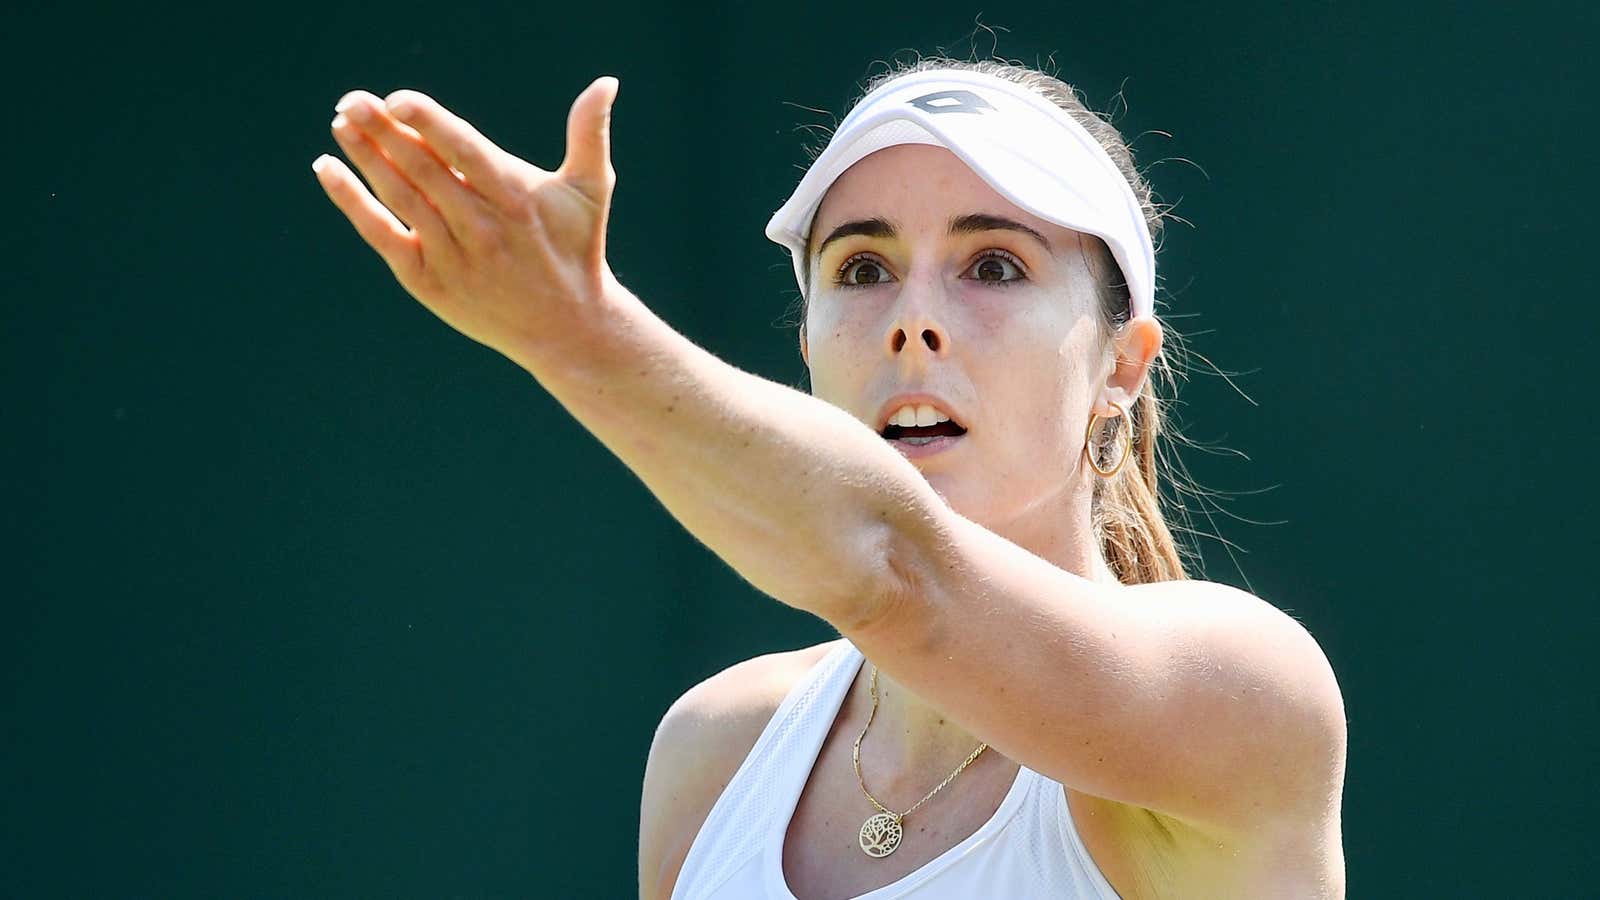 France’s Alize Cornet protests an umpire’s call at Wimbledon in July.